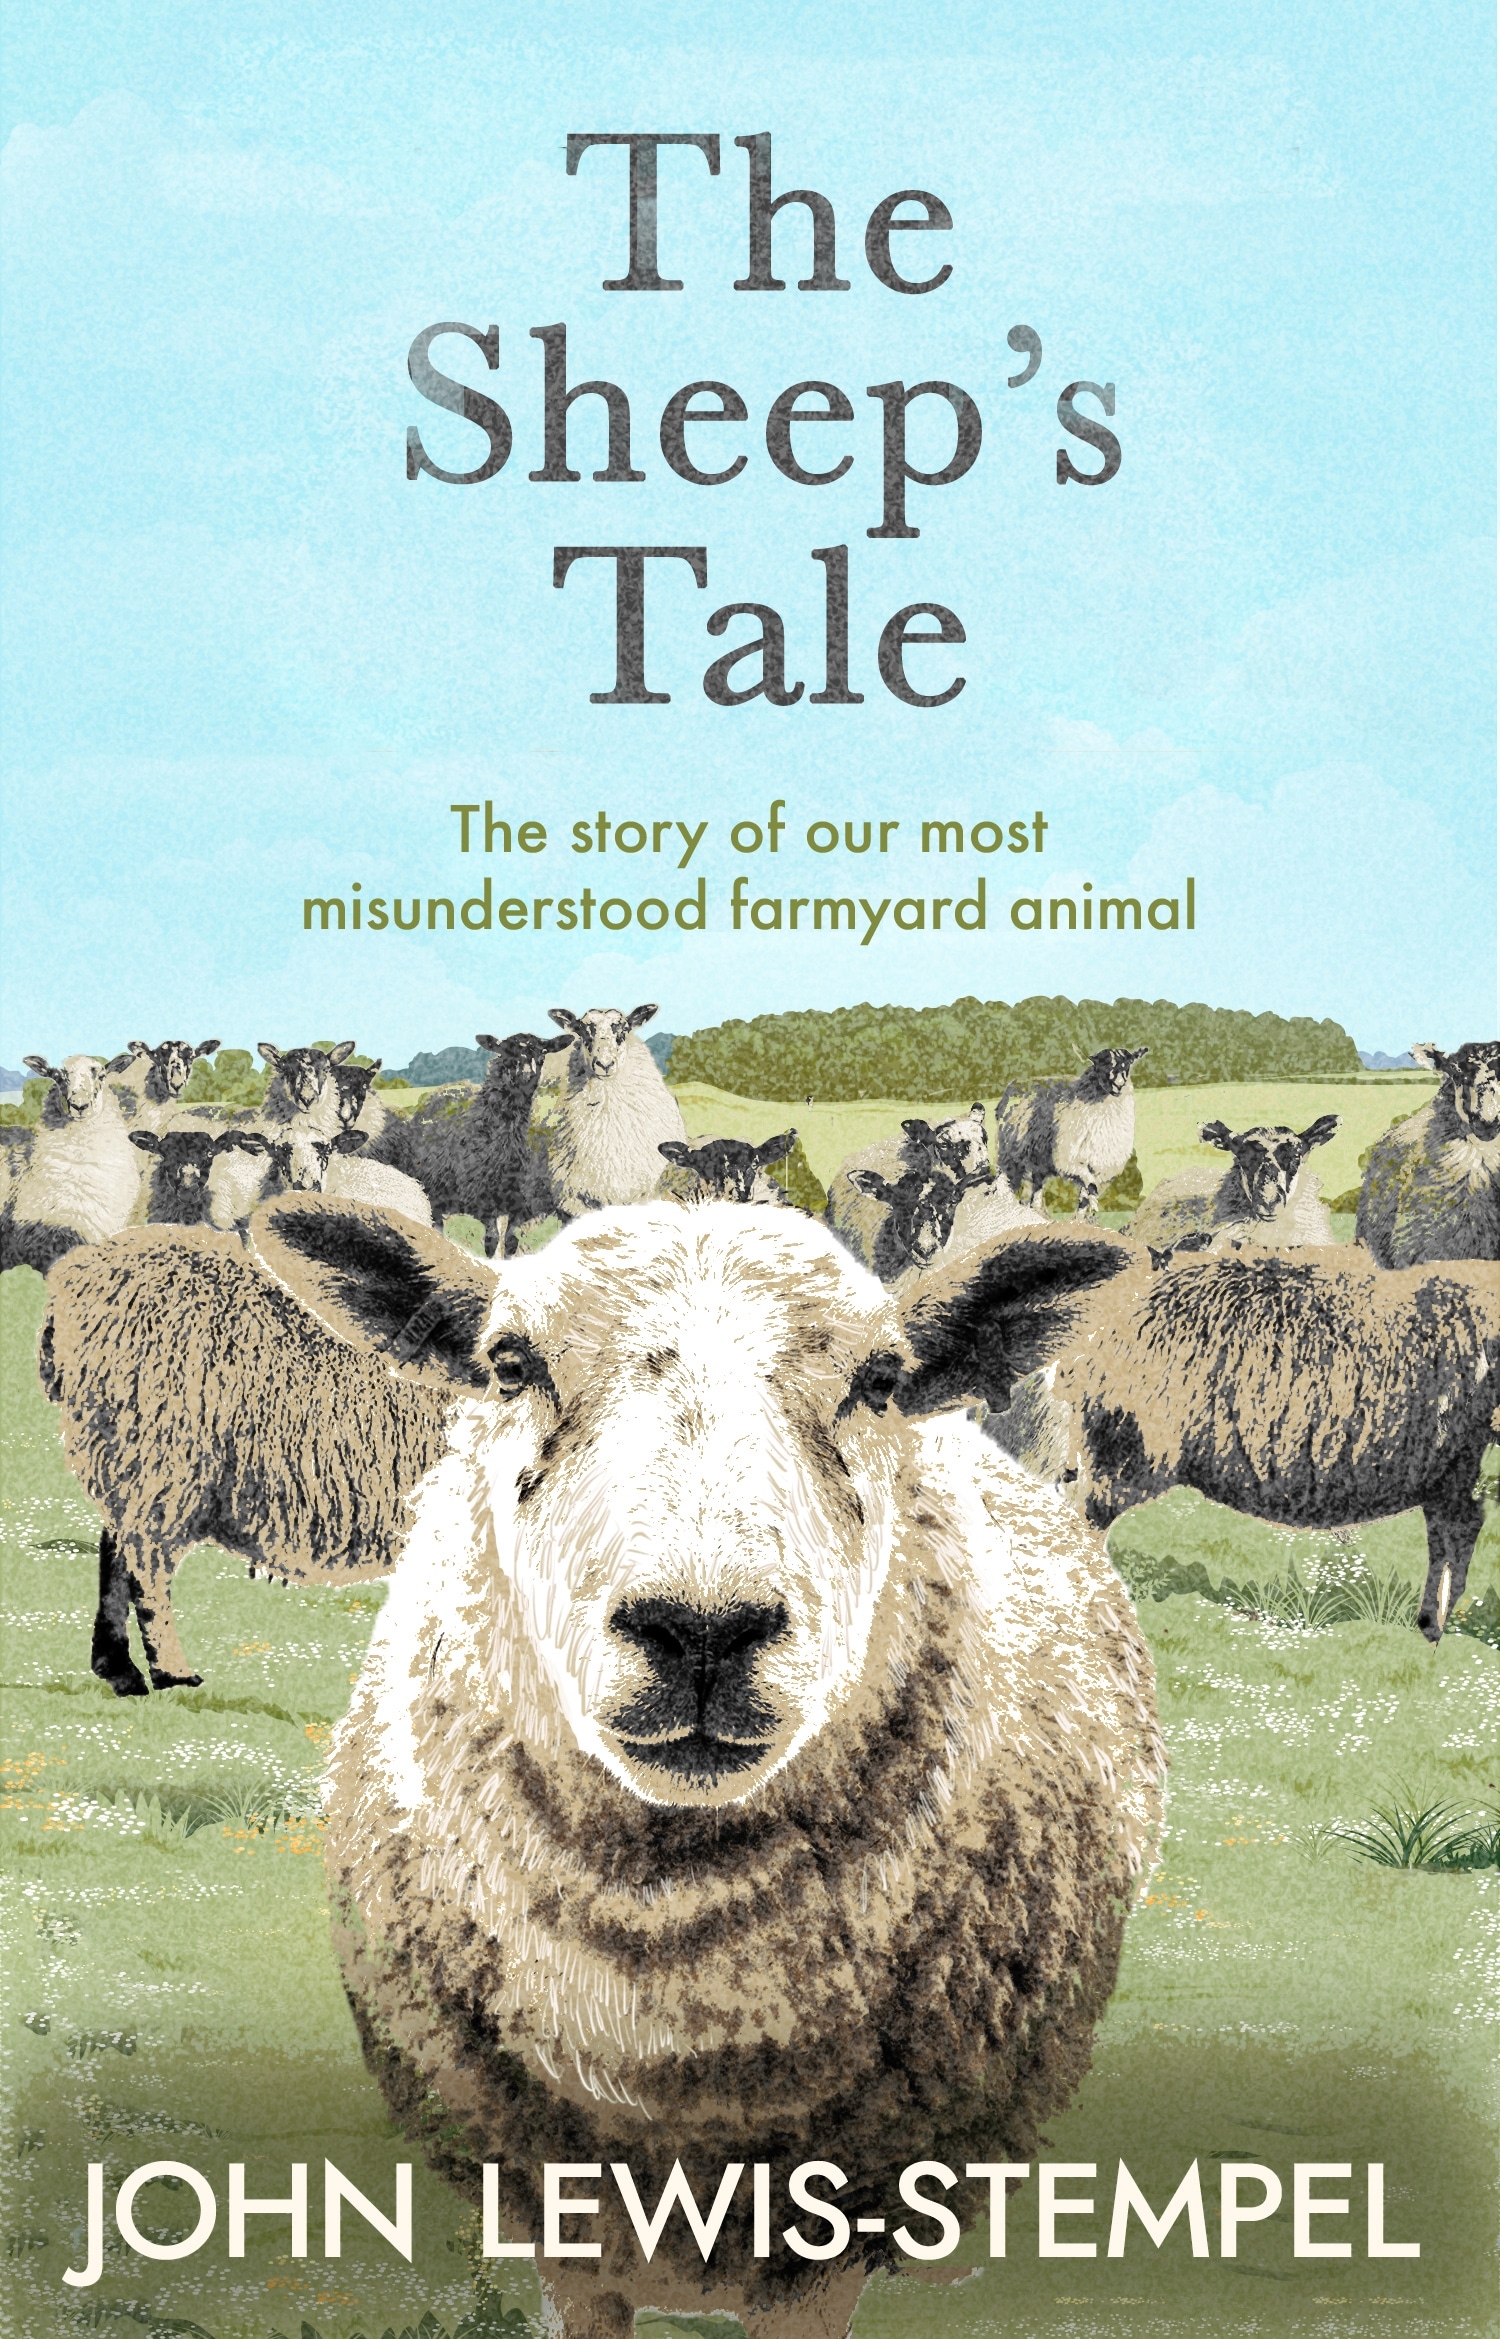 Book “The Sheep’s Tale” by John Lewis-Stempel — April 7, 2022